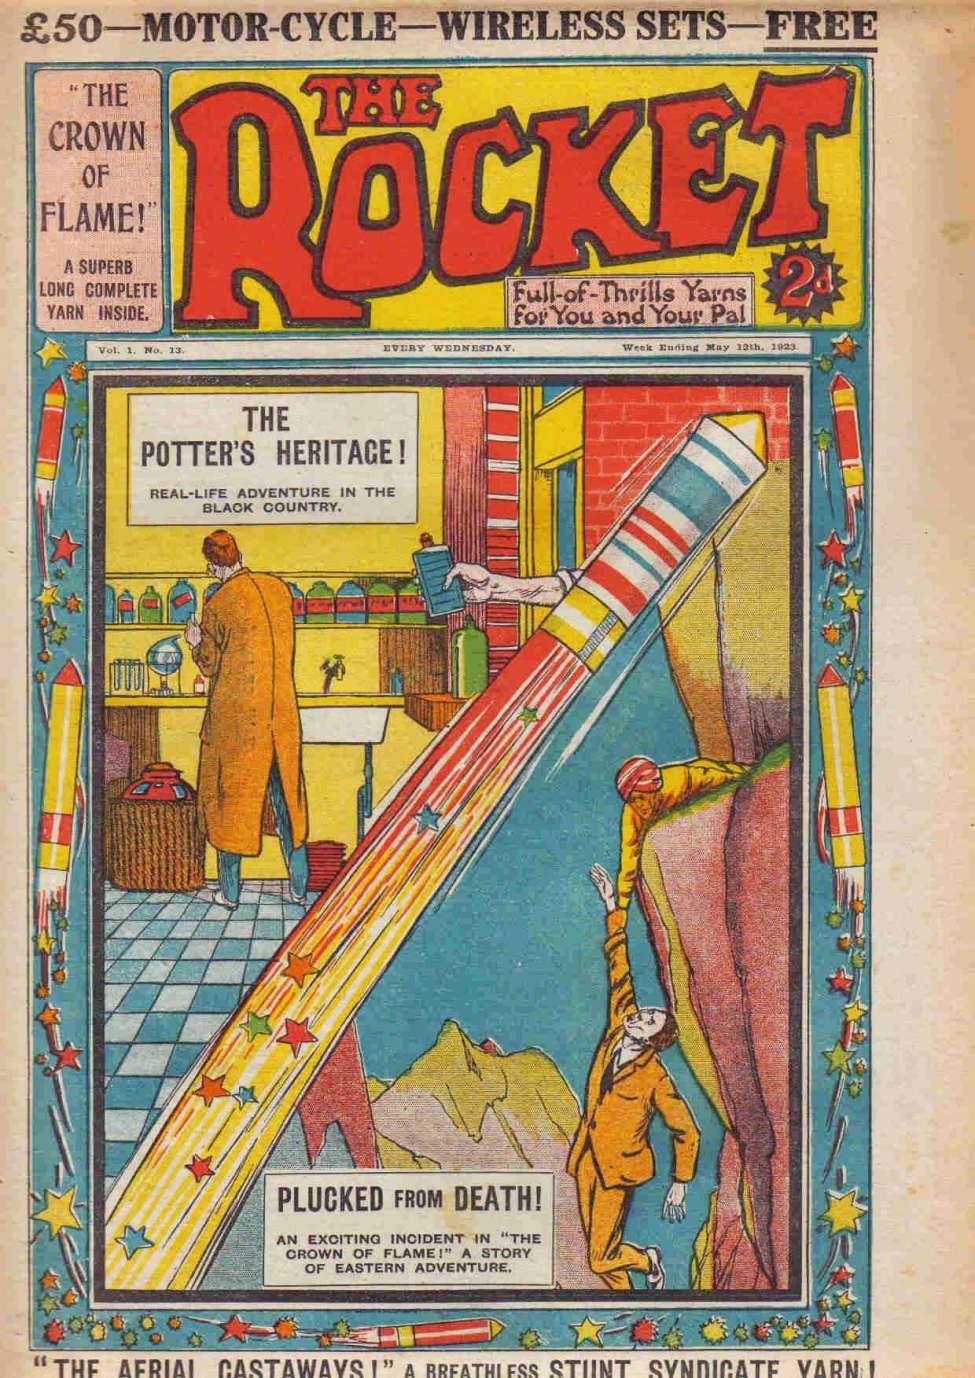 Comic Book Cover For The Rocket 13 - The Potter's Heritage!